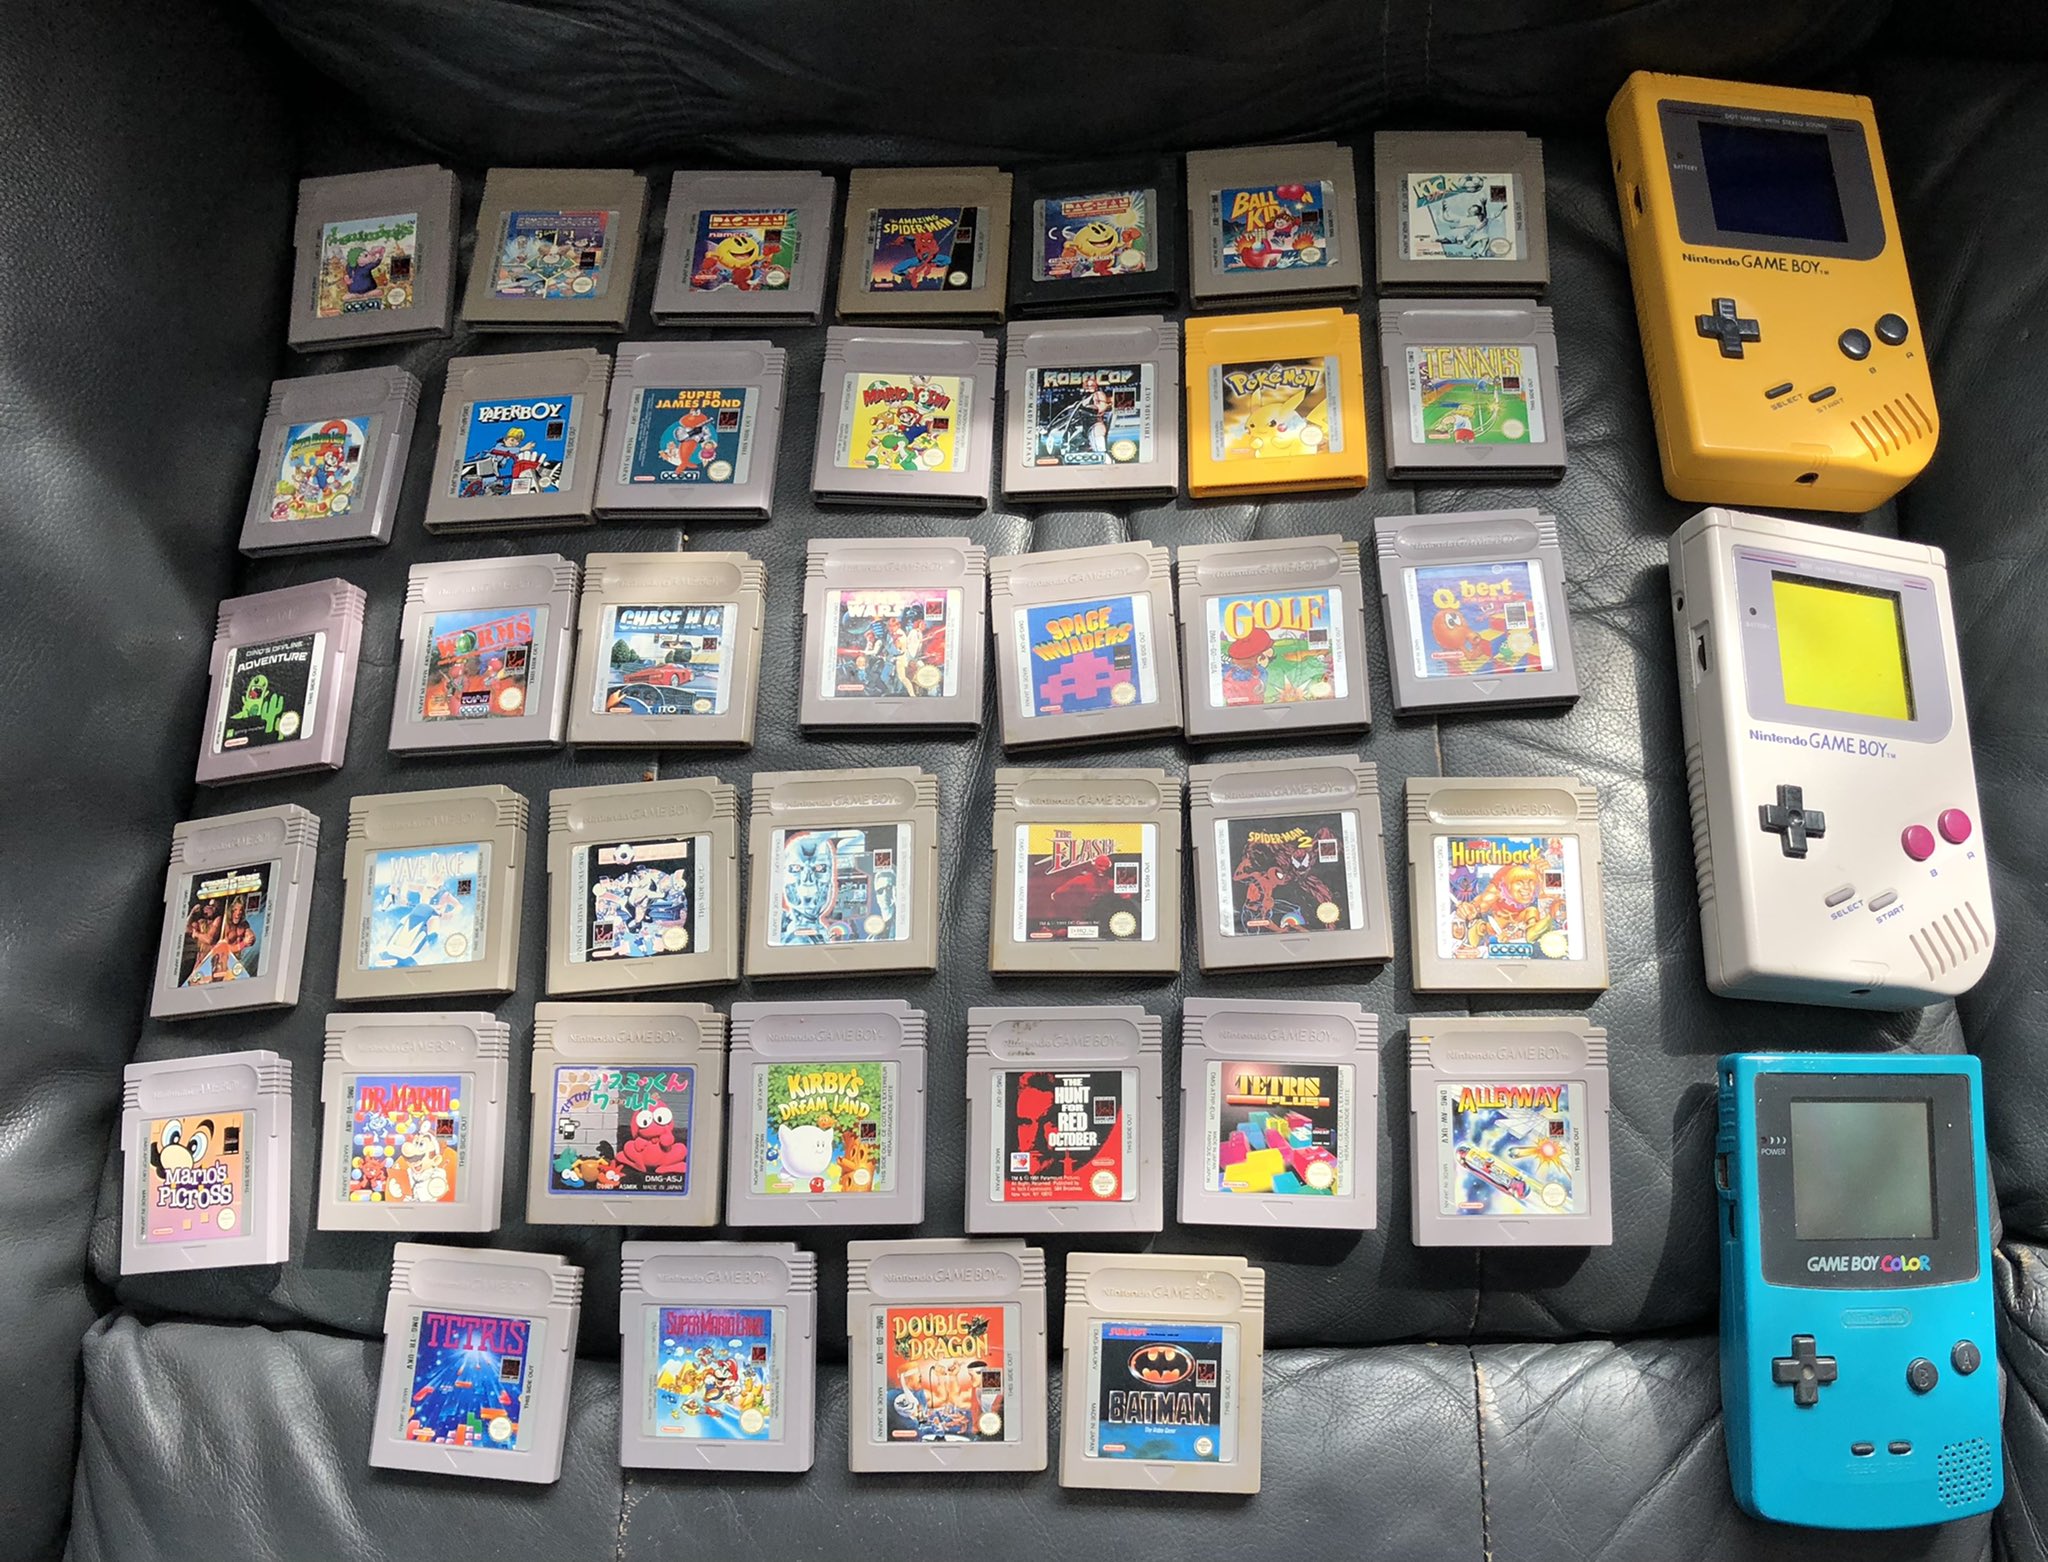 Dunktech on Twitter: the last 31 days I've enjoyed playing a #gameboy game a day. Reminded me how great the gameboy really was. Heres the games laid out your viewing